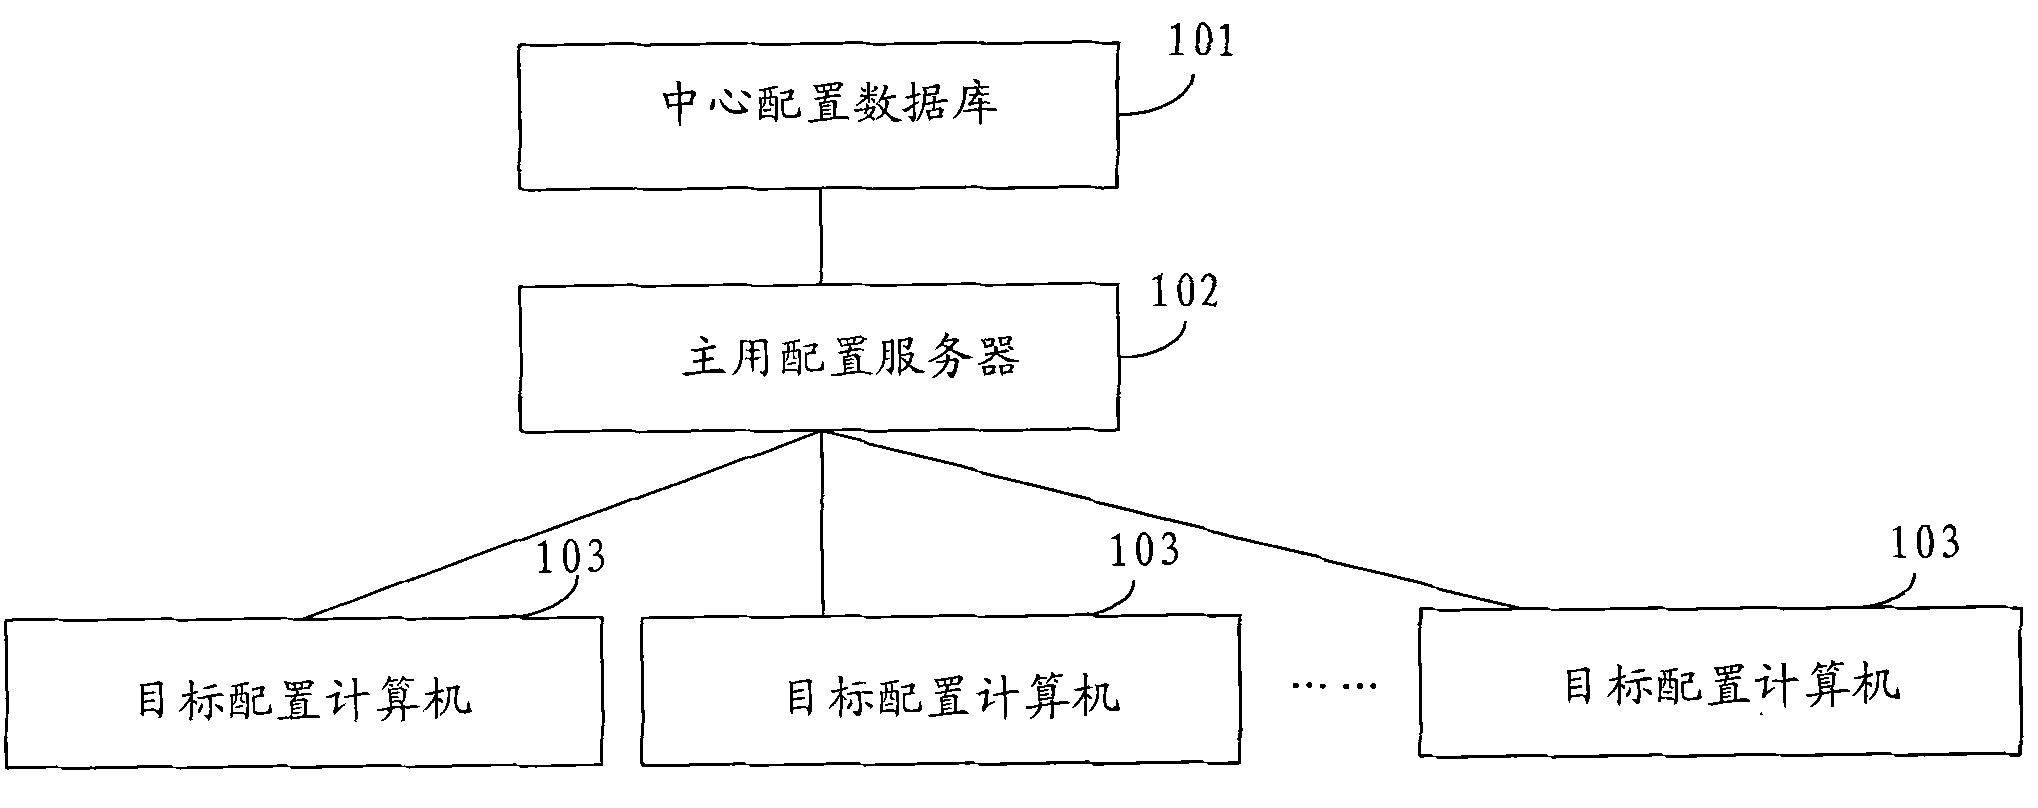 System and method for configuring multiple computers